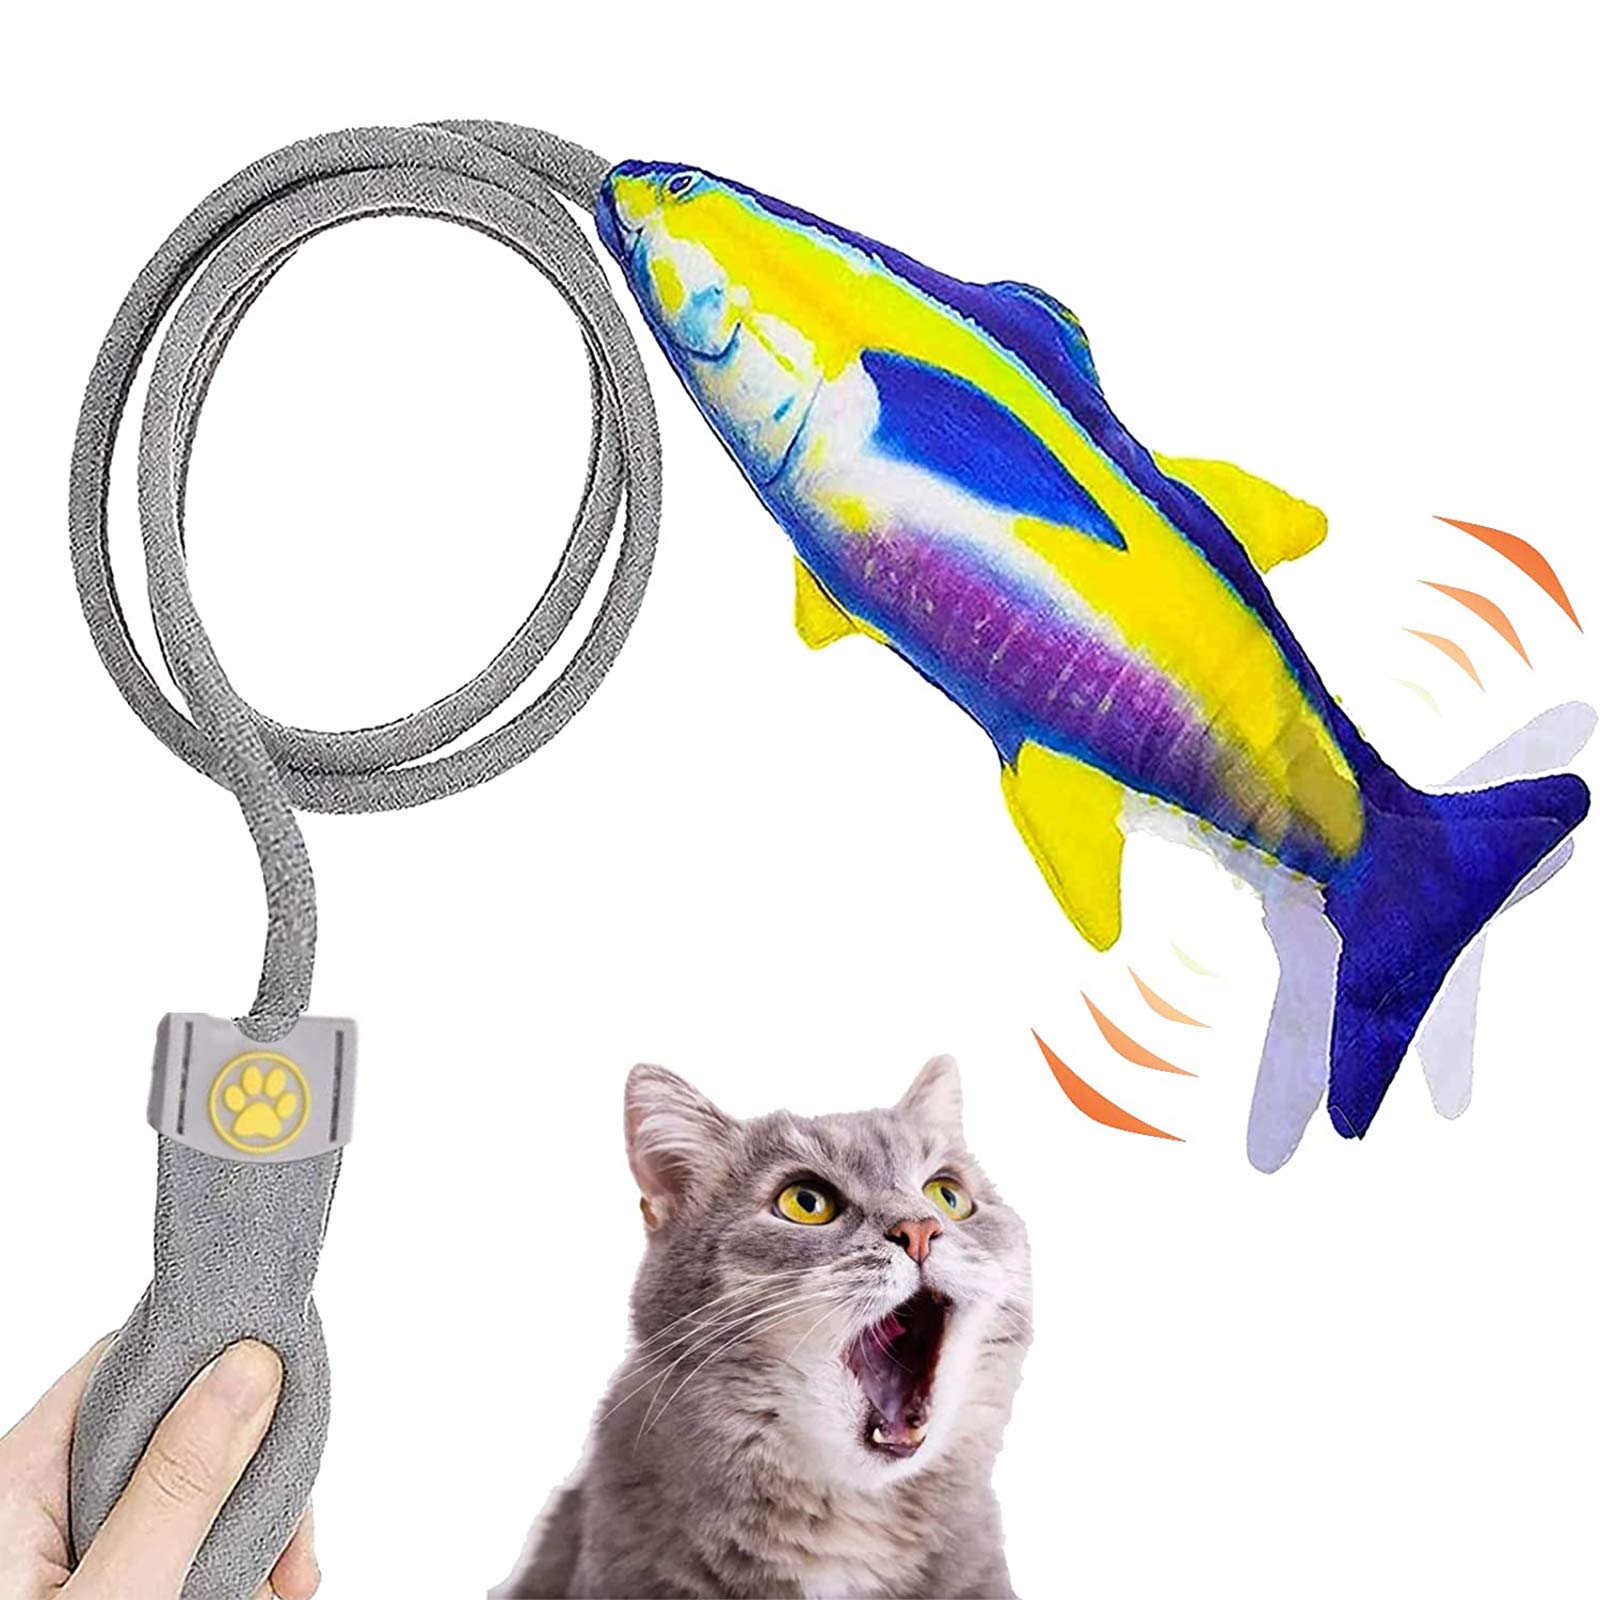 Fish Cat Toy with Catnip and Bell